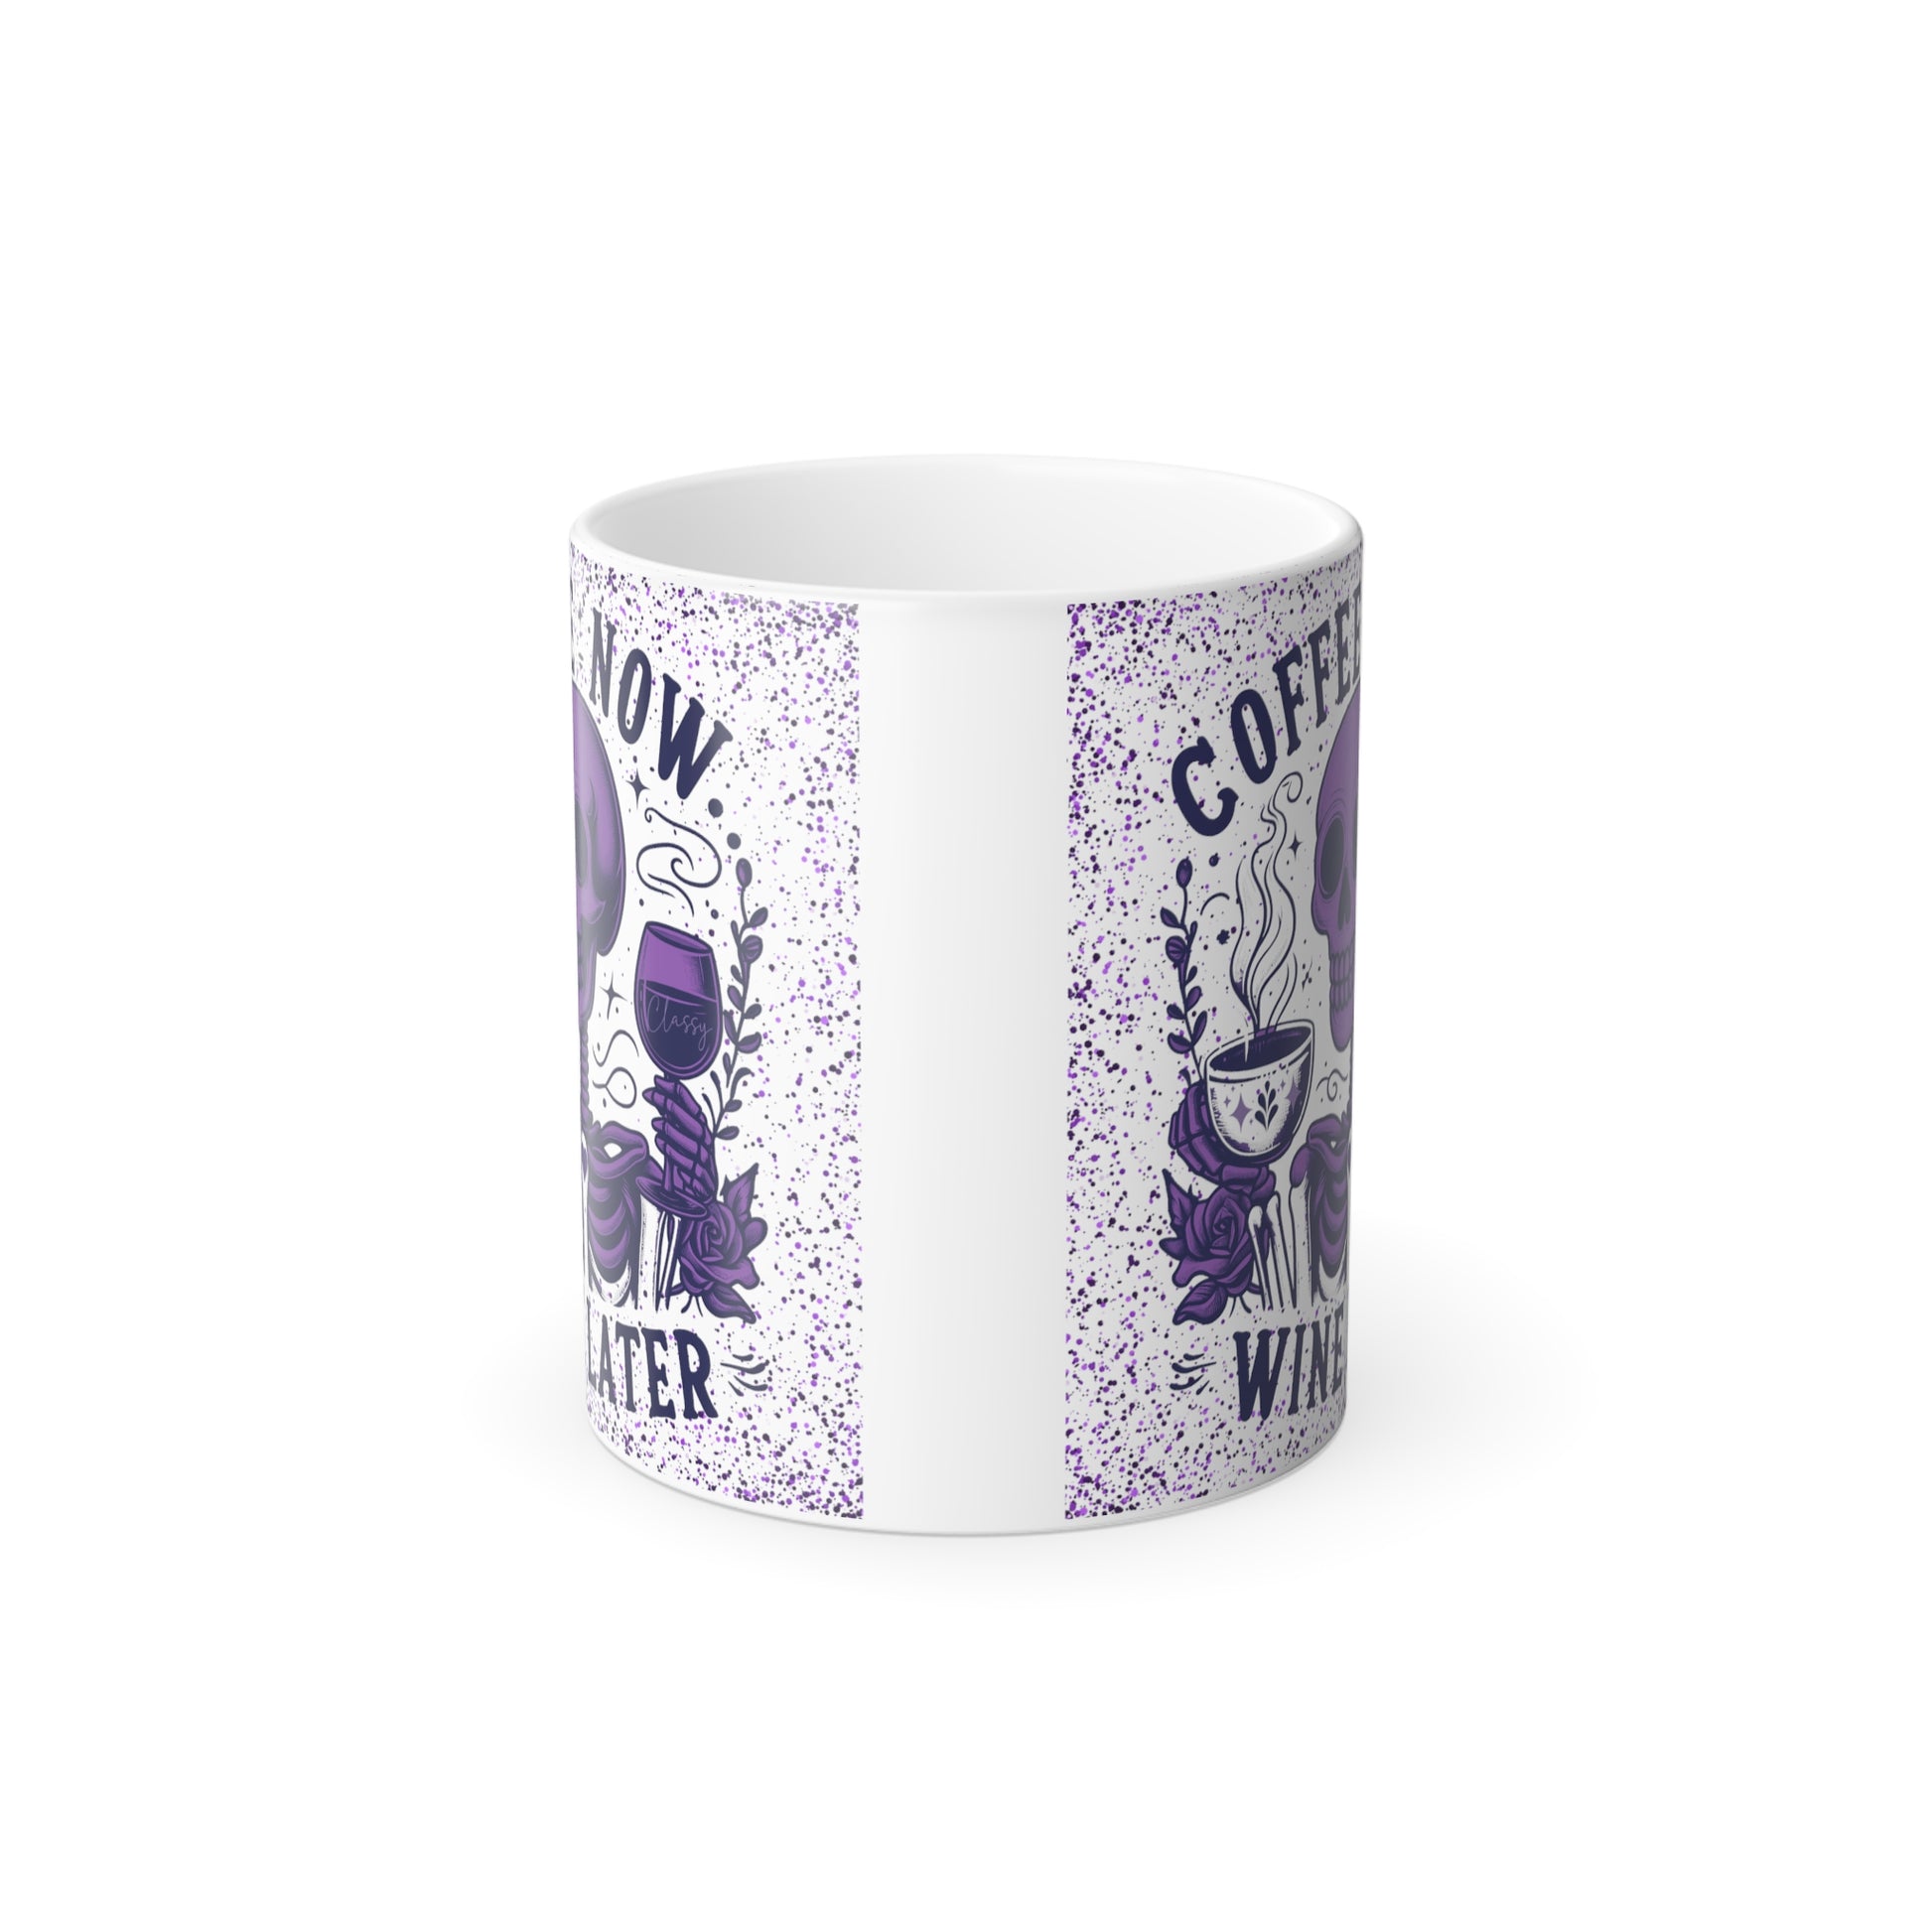 Color morphing mug with purple skeleton for gift, side view.